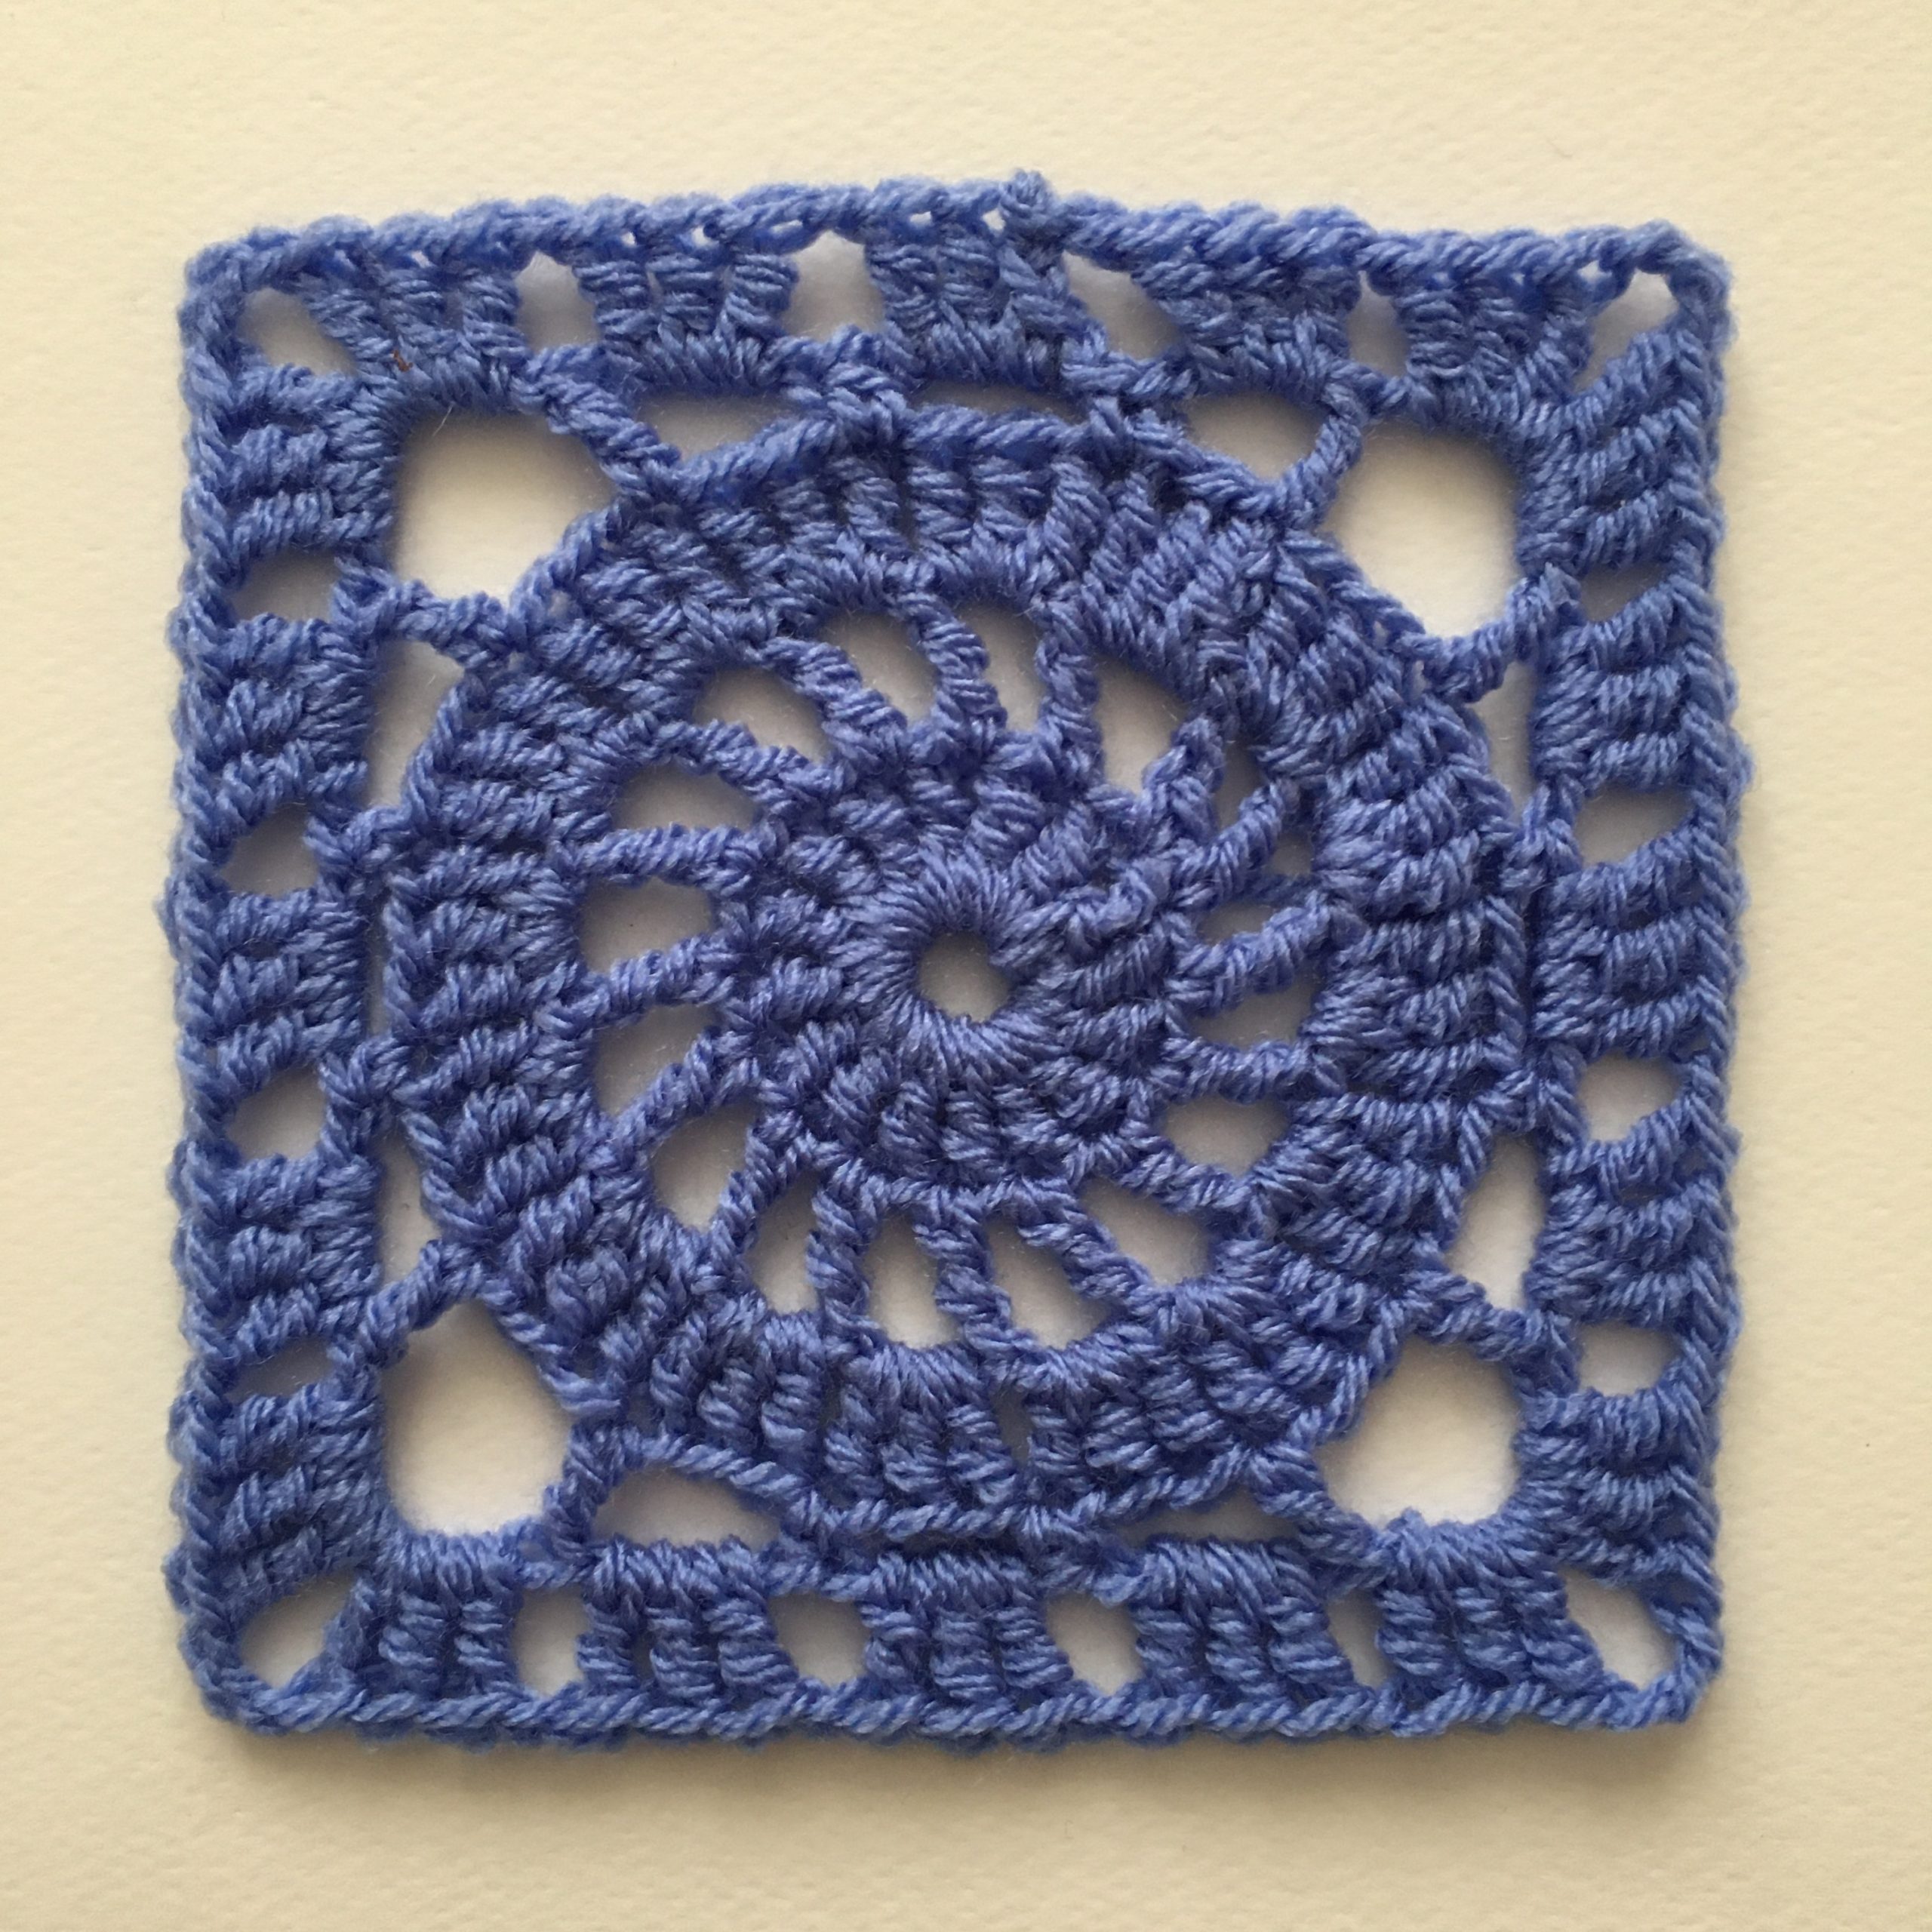 Blue crochet square from the Gilmore Girls. 